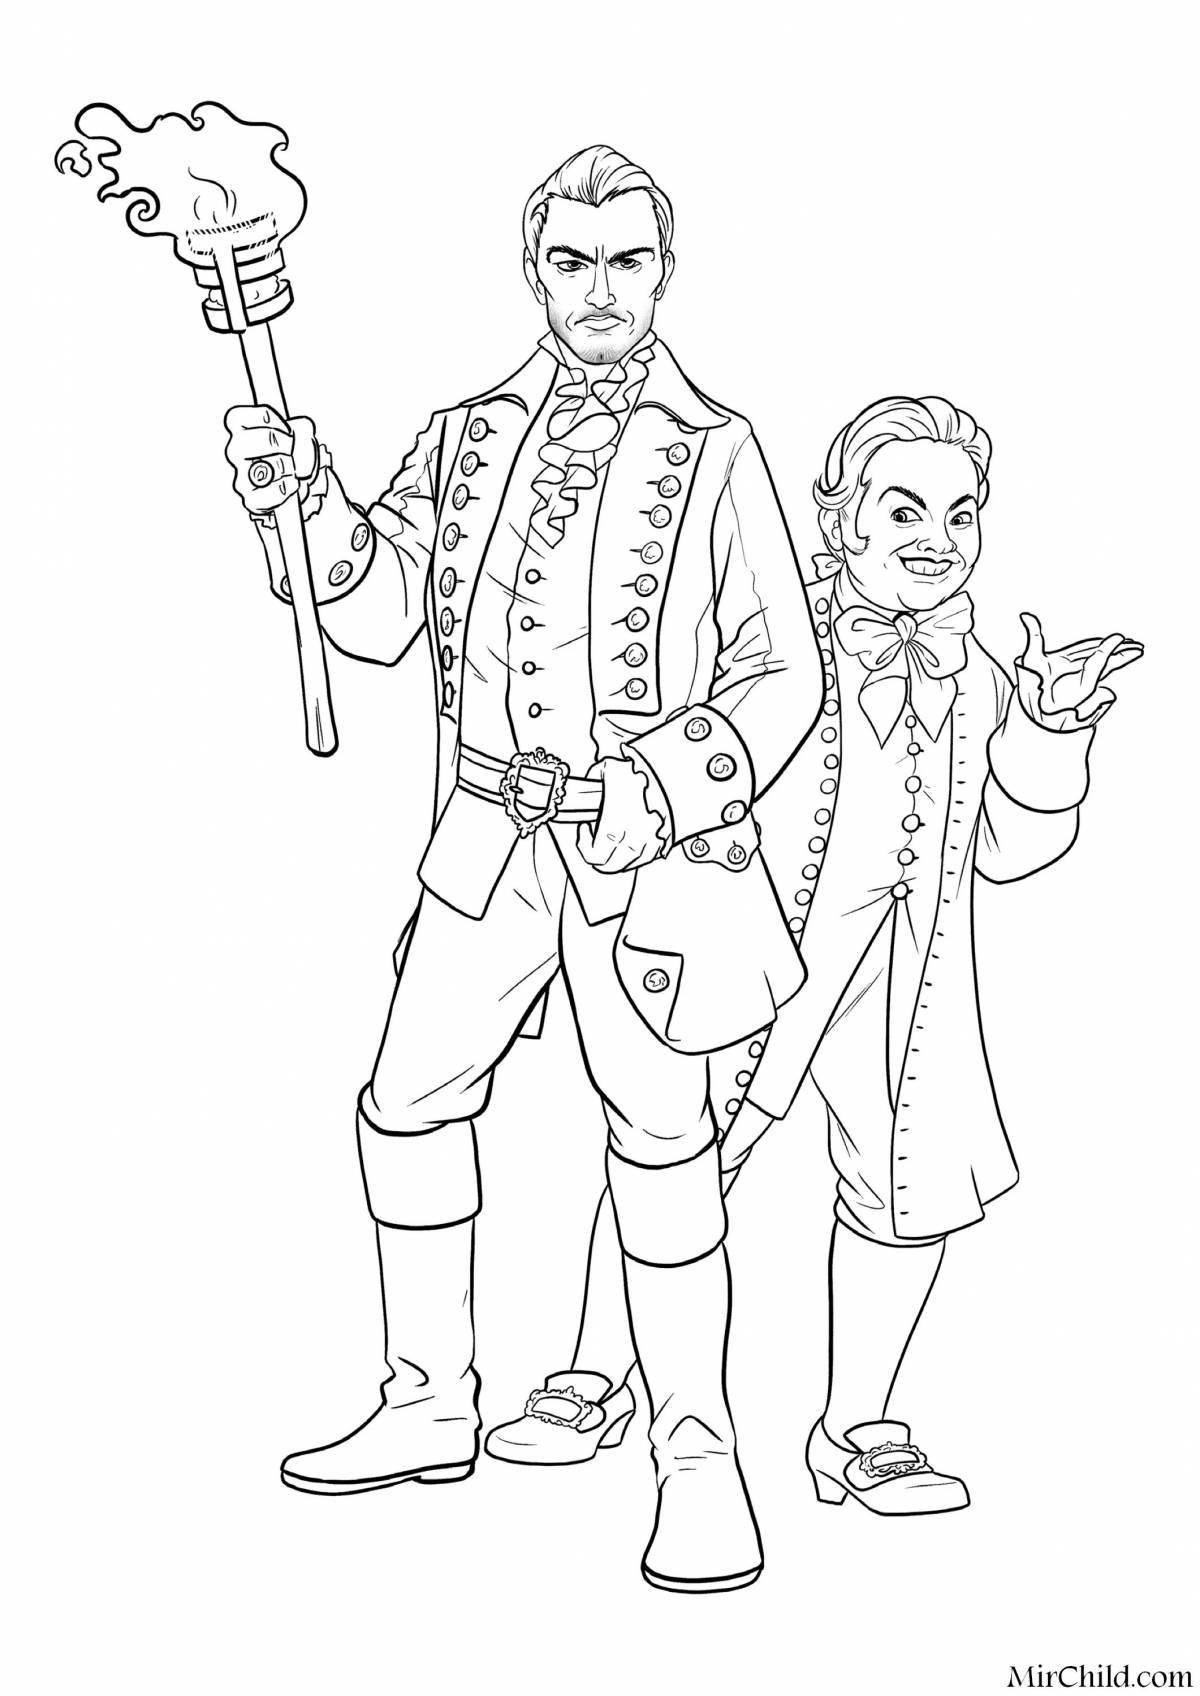 Charming gaston coloring book